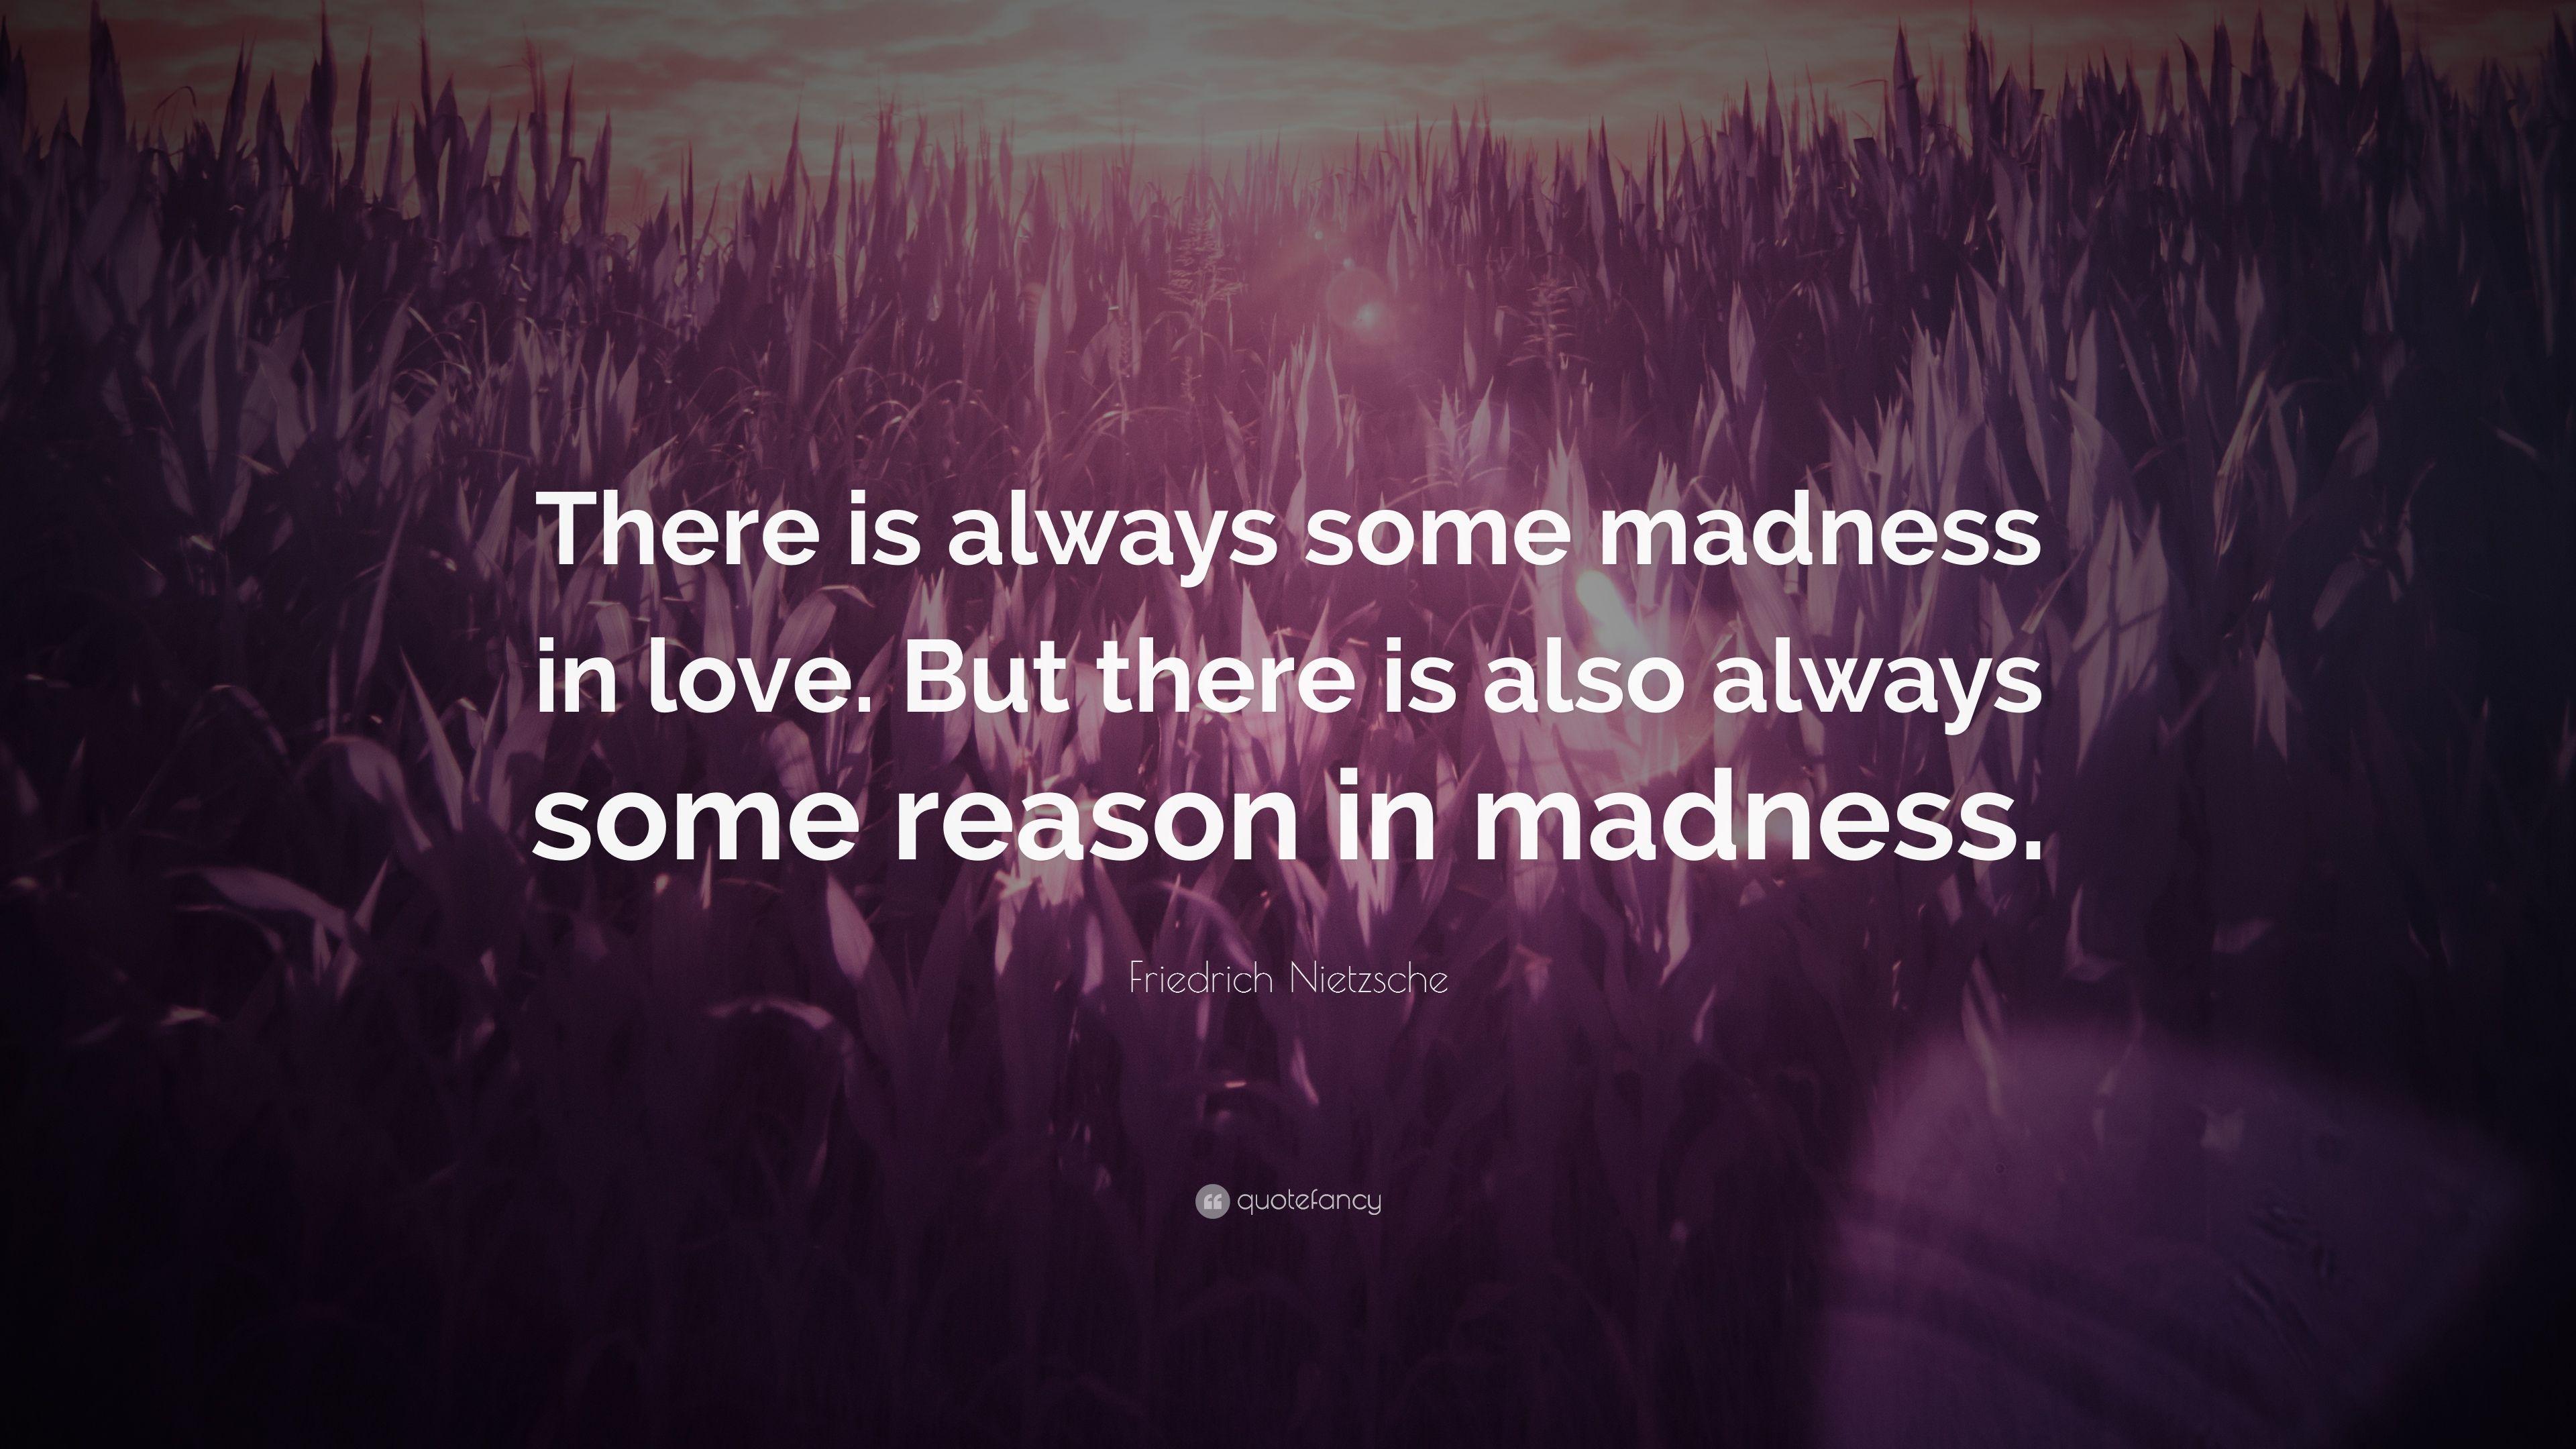 Friedrich Nietzsche Quote: “There is always some madness in love